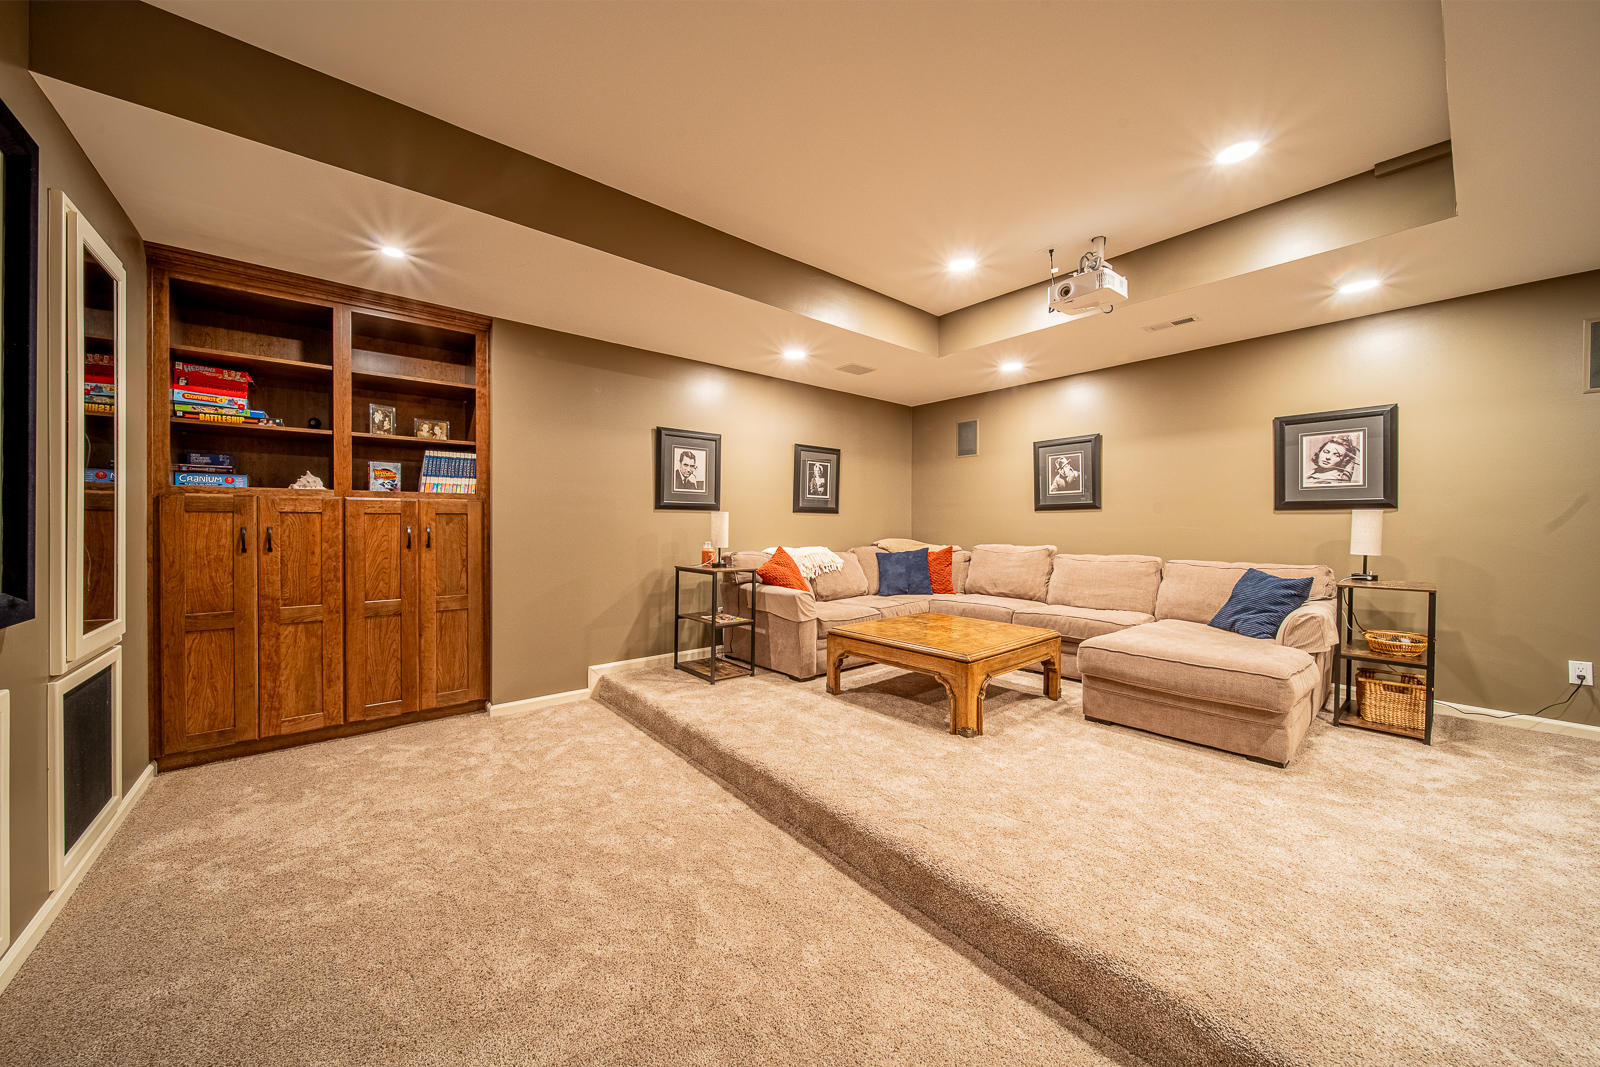 Modern and rustic living room design in the renovated basement on Ripple Creek Drive.